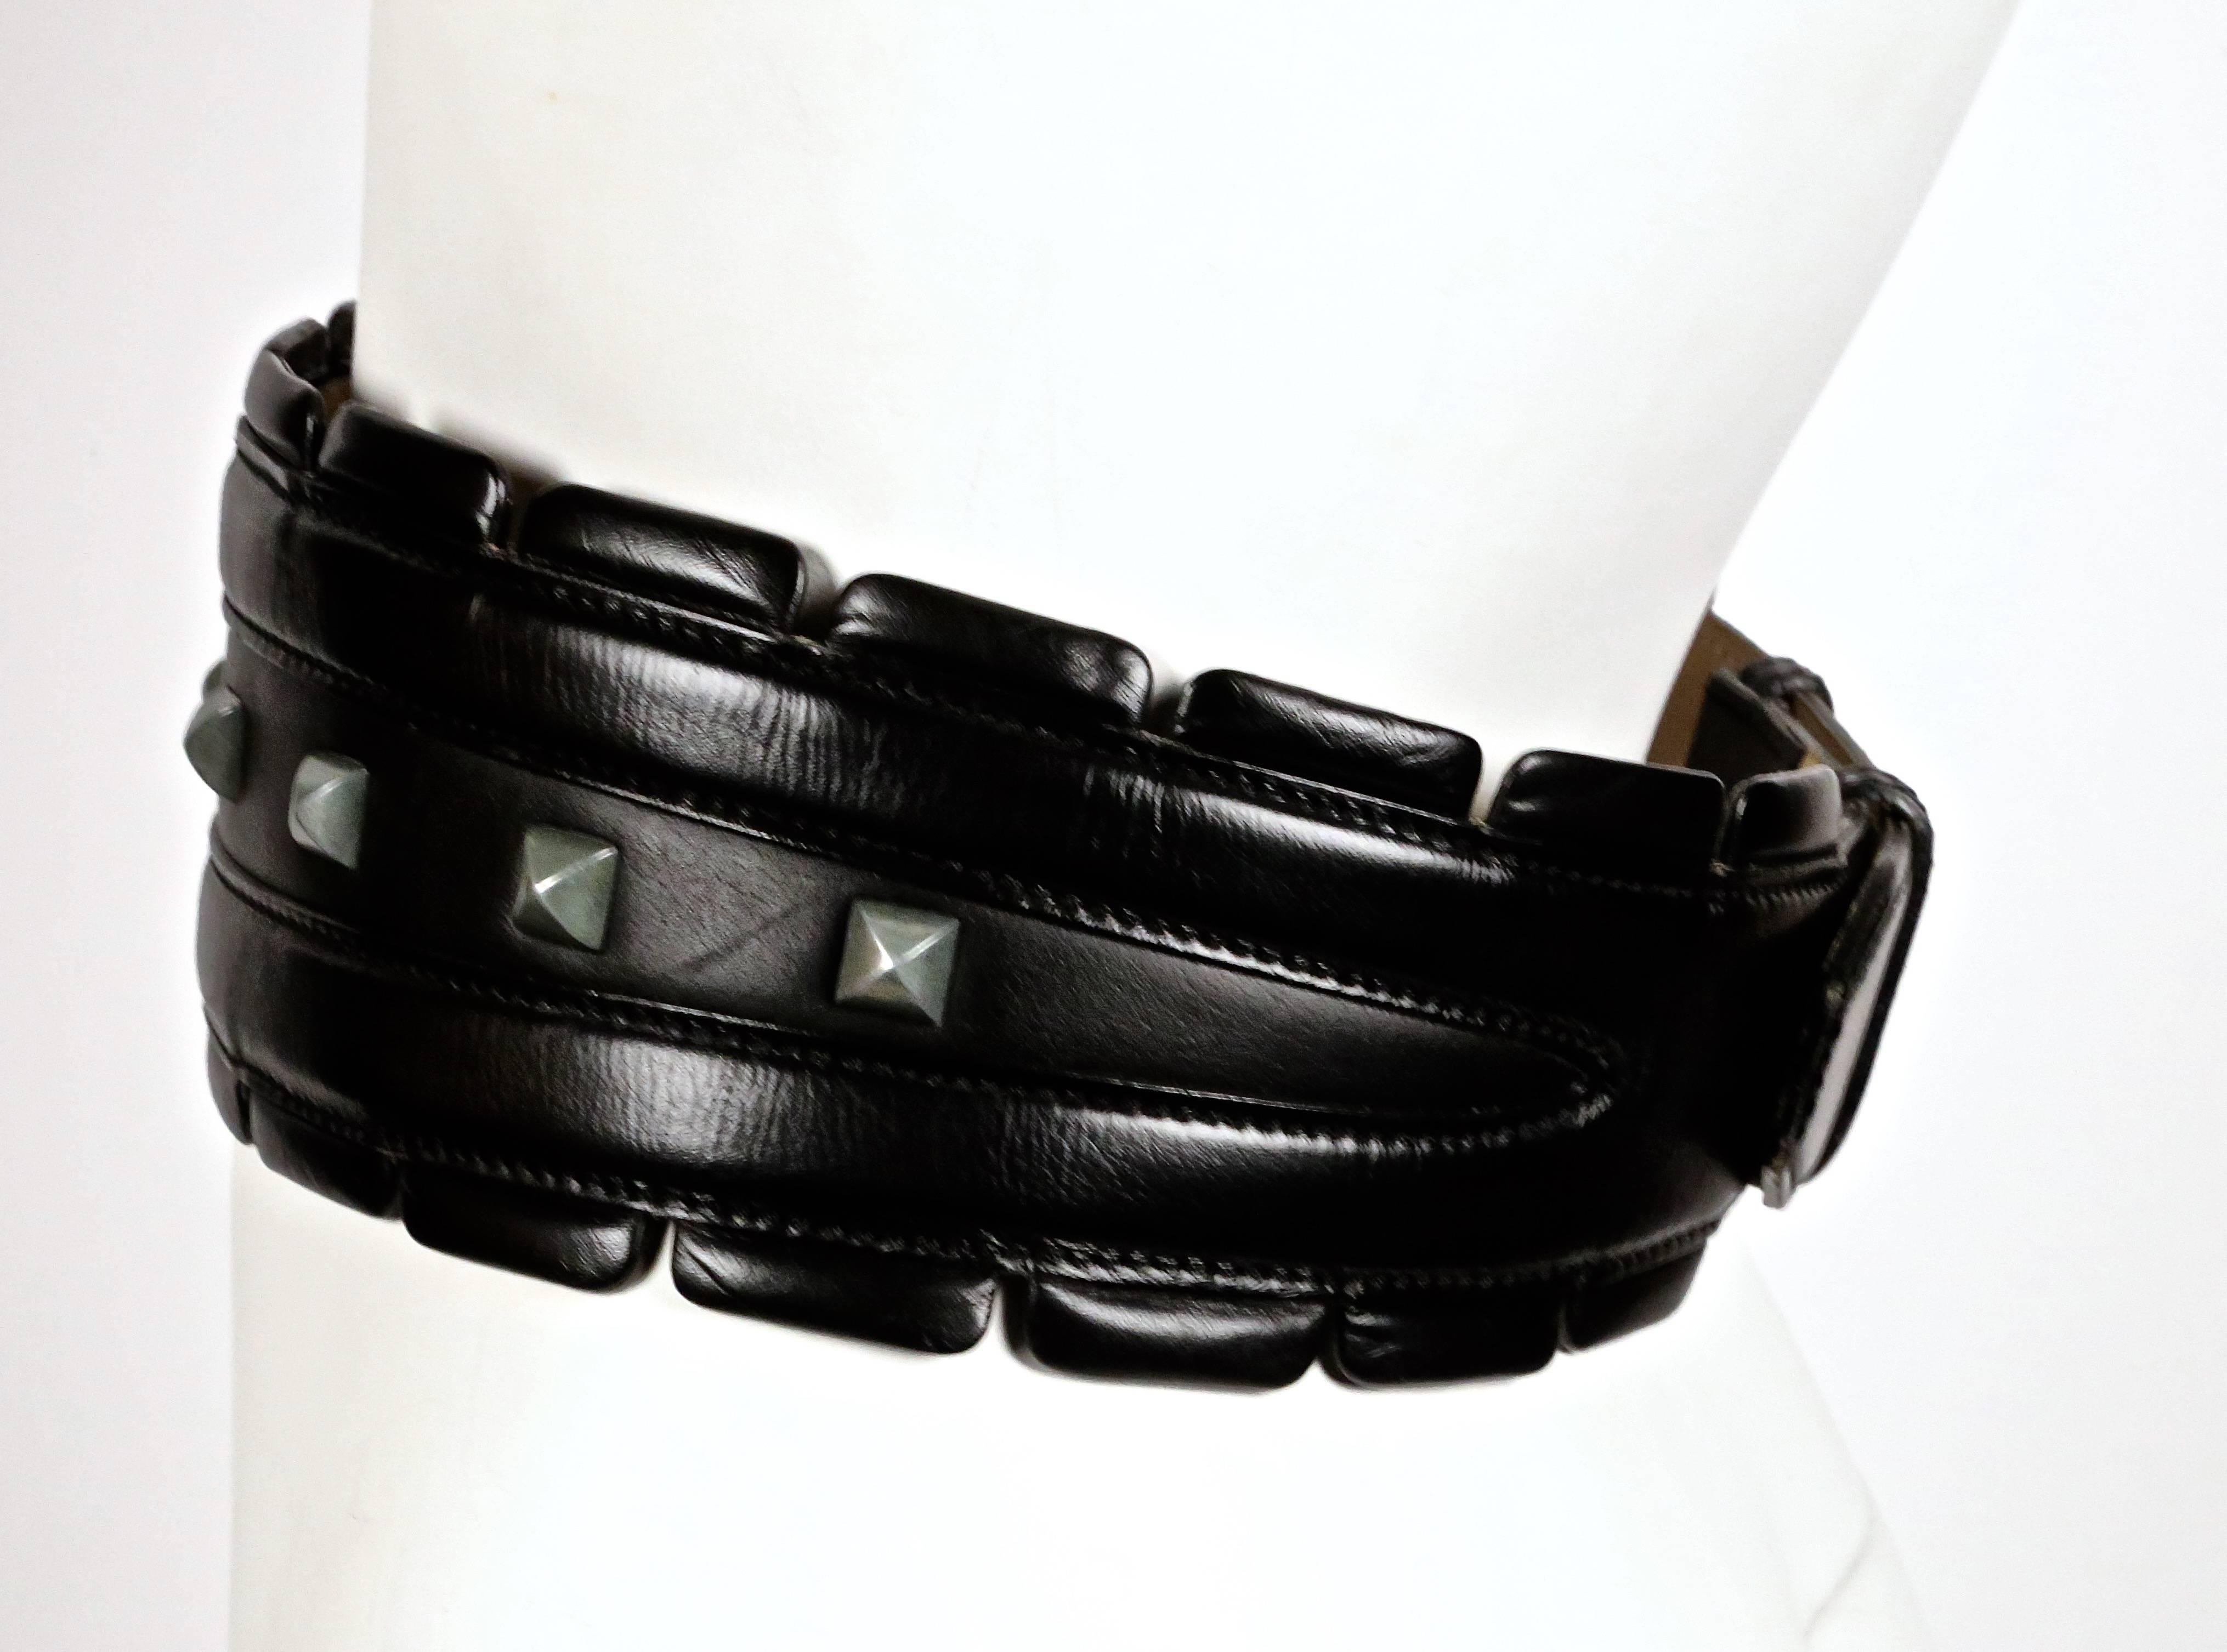 Very rare jet black leather belt with silver toned pyramid studs from Azzedine Alaia dating as seen on the fall 1988 runway. Belt is labeled a French 75 and ideally fits a 27-29